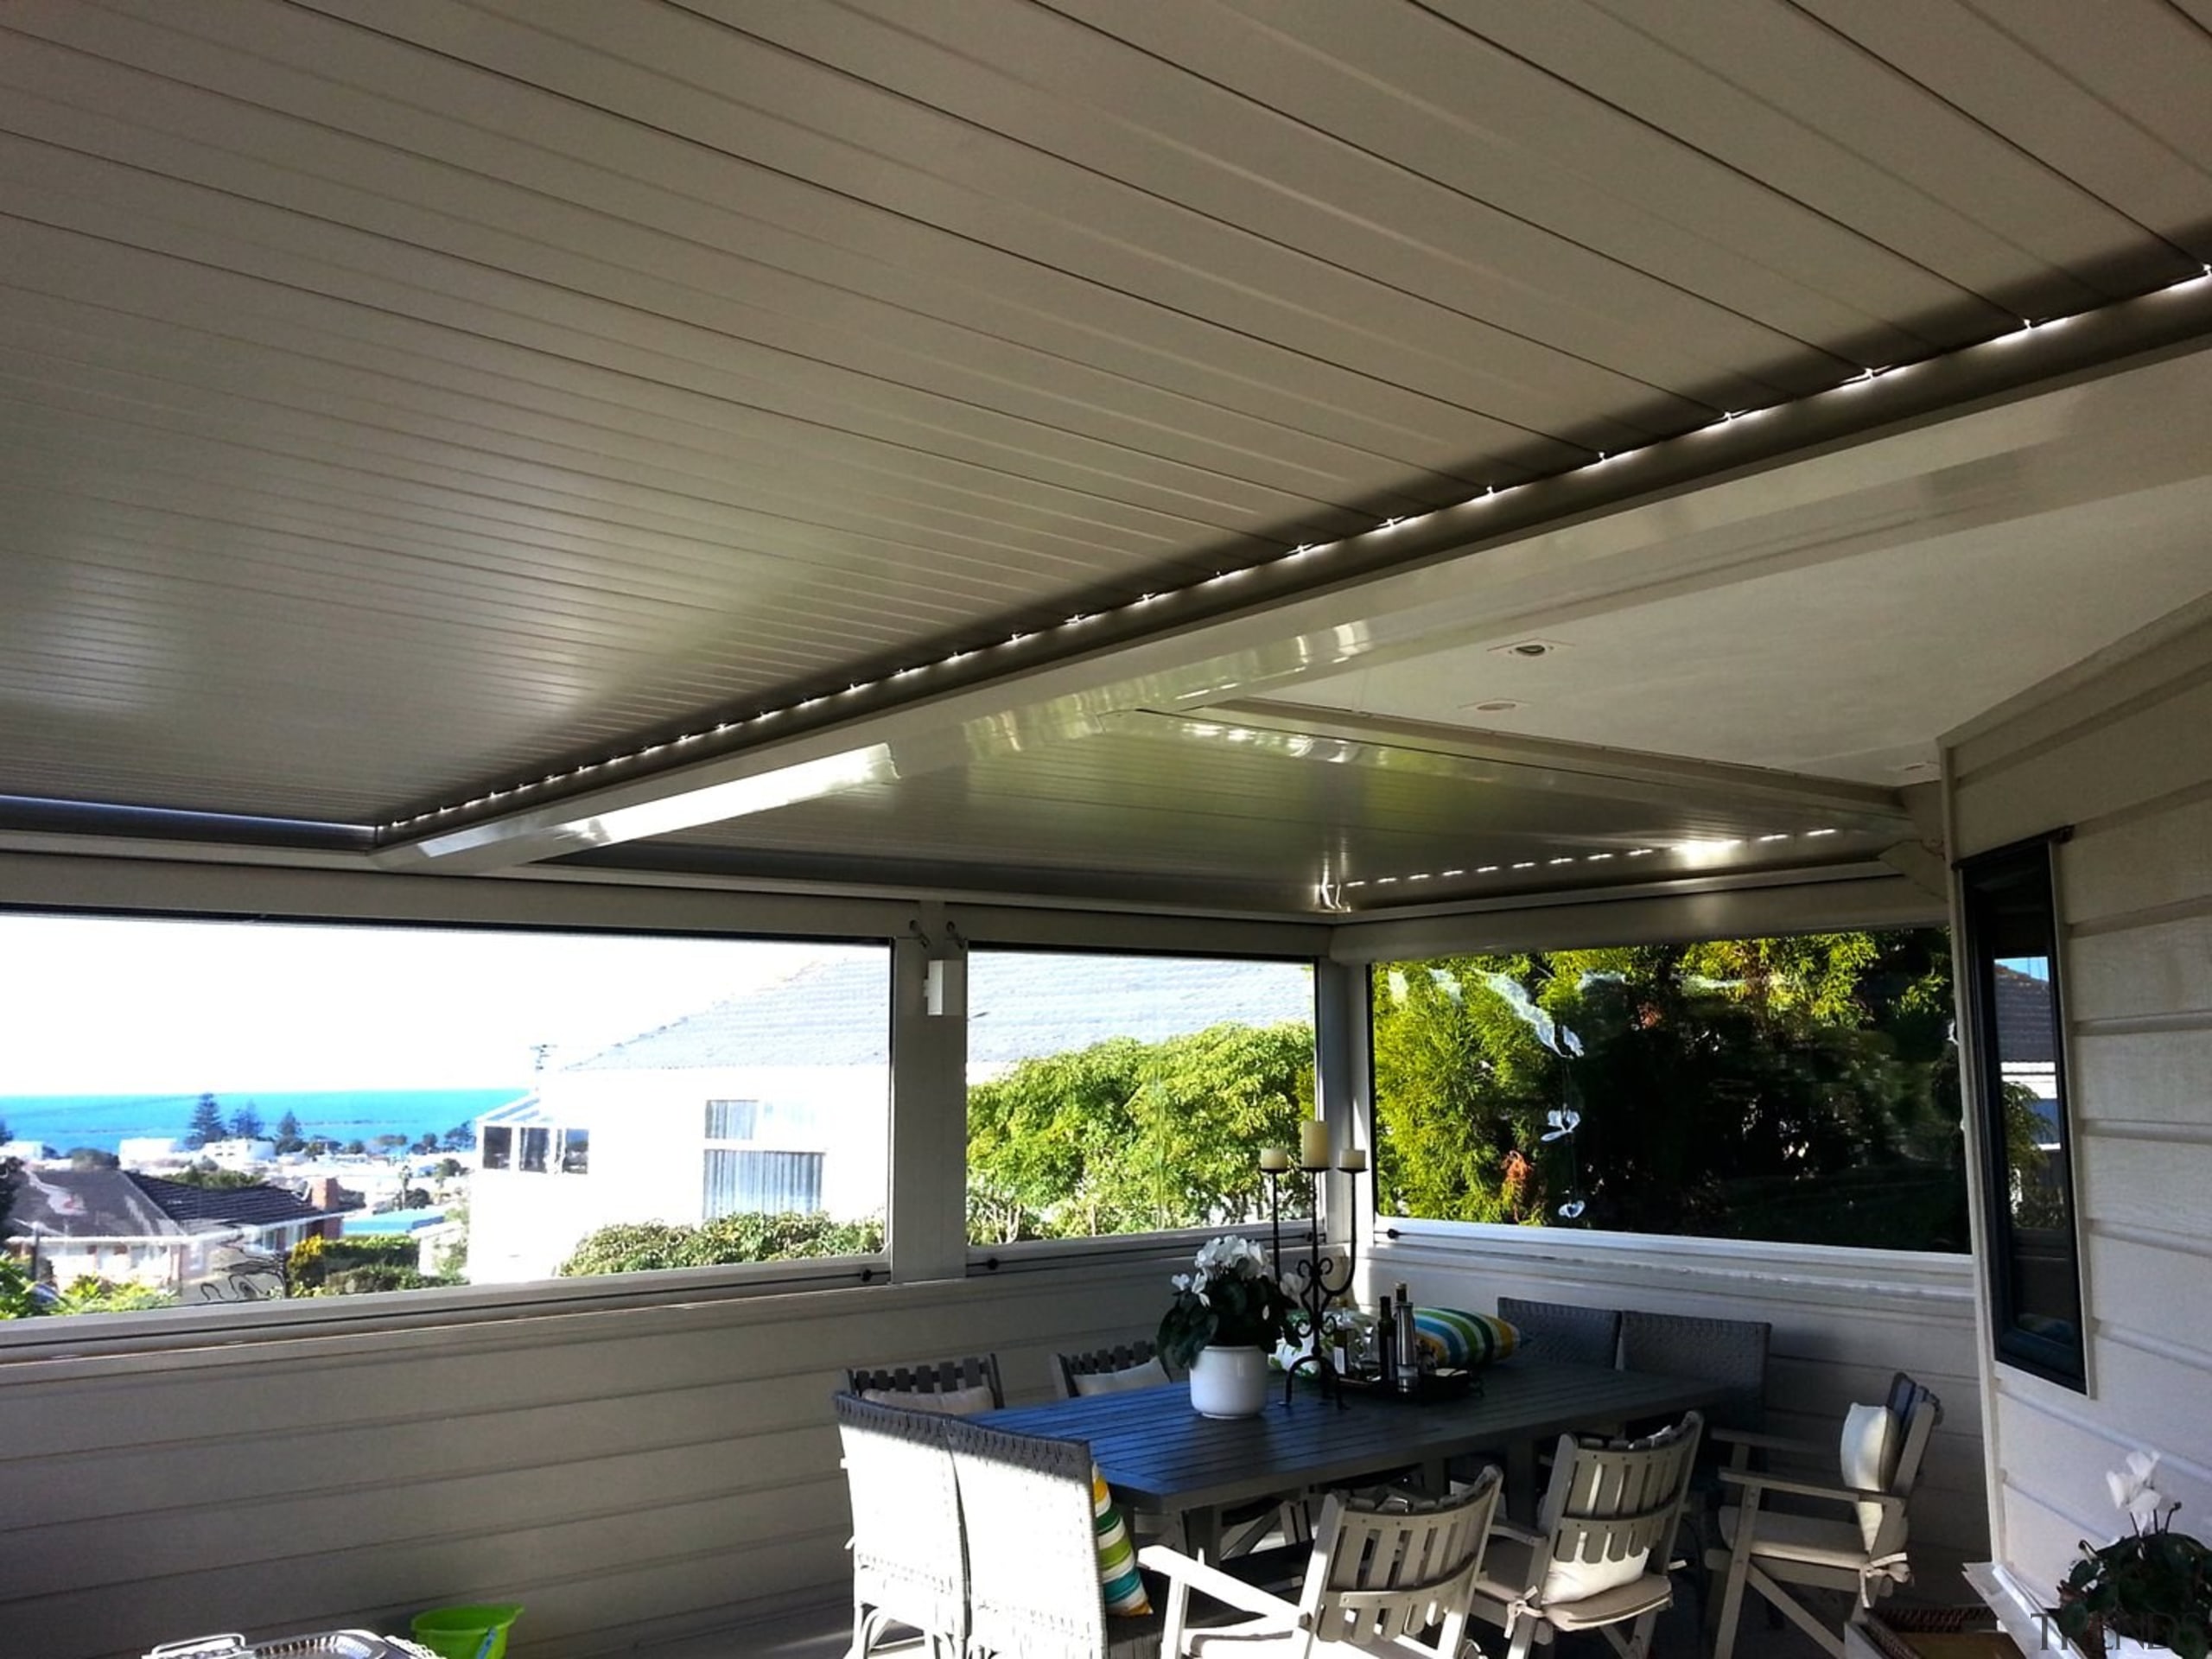 Silencio Rotating Louvres - canopy | ceiling | canopy, ceiling, daylighting, outdoor structure, real estate, roof, shade, gray, black